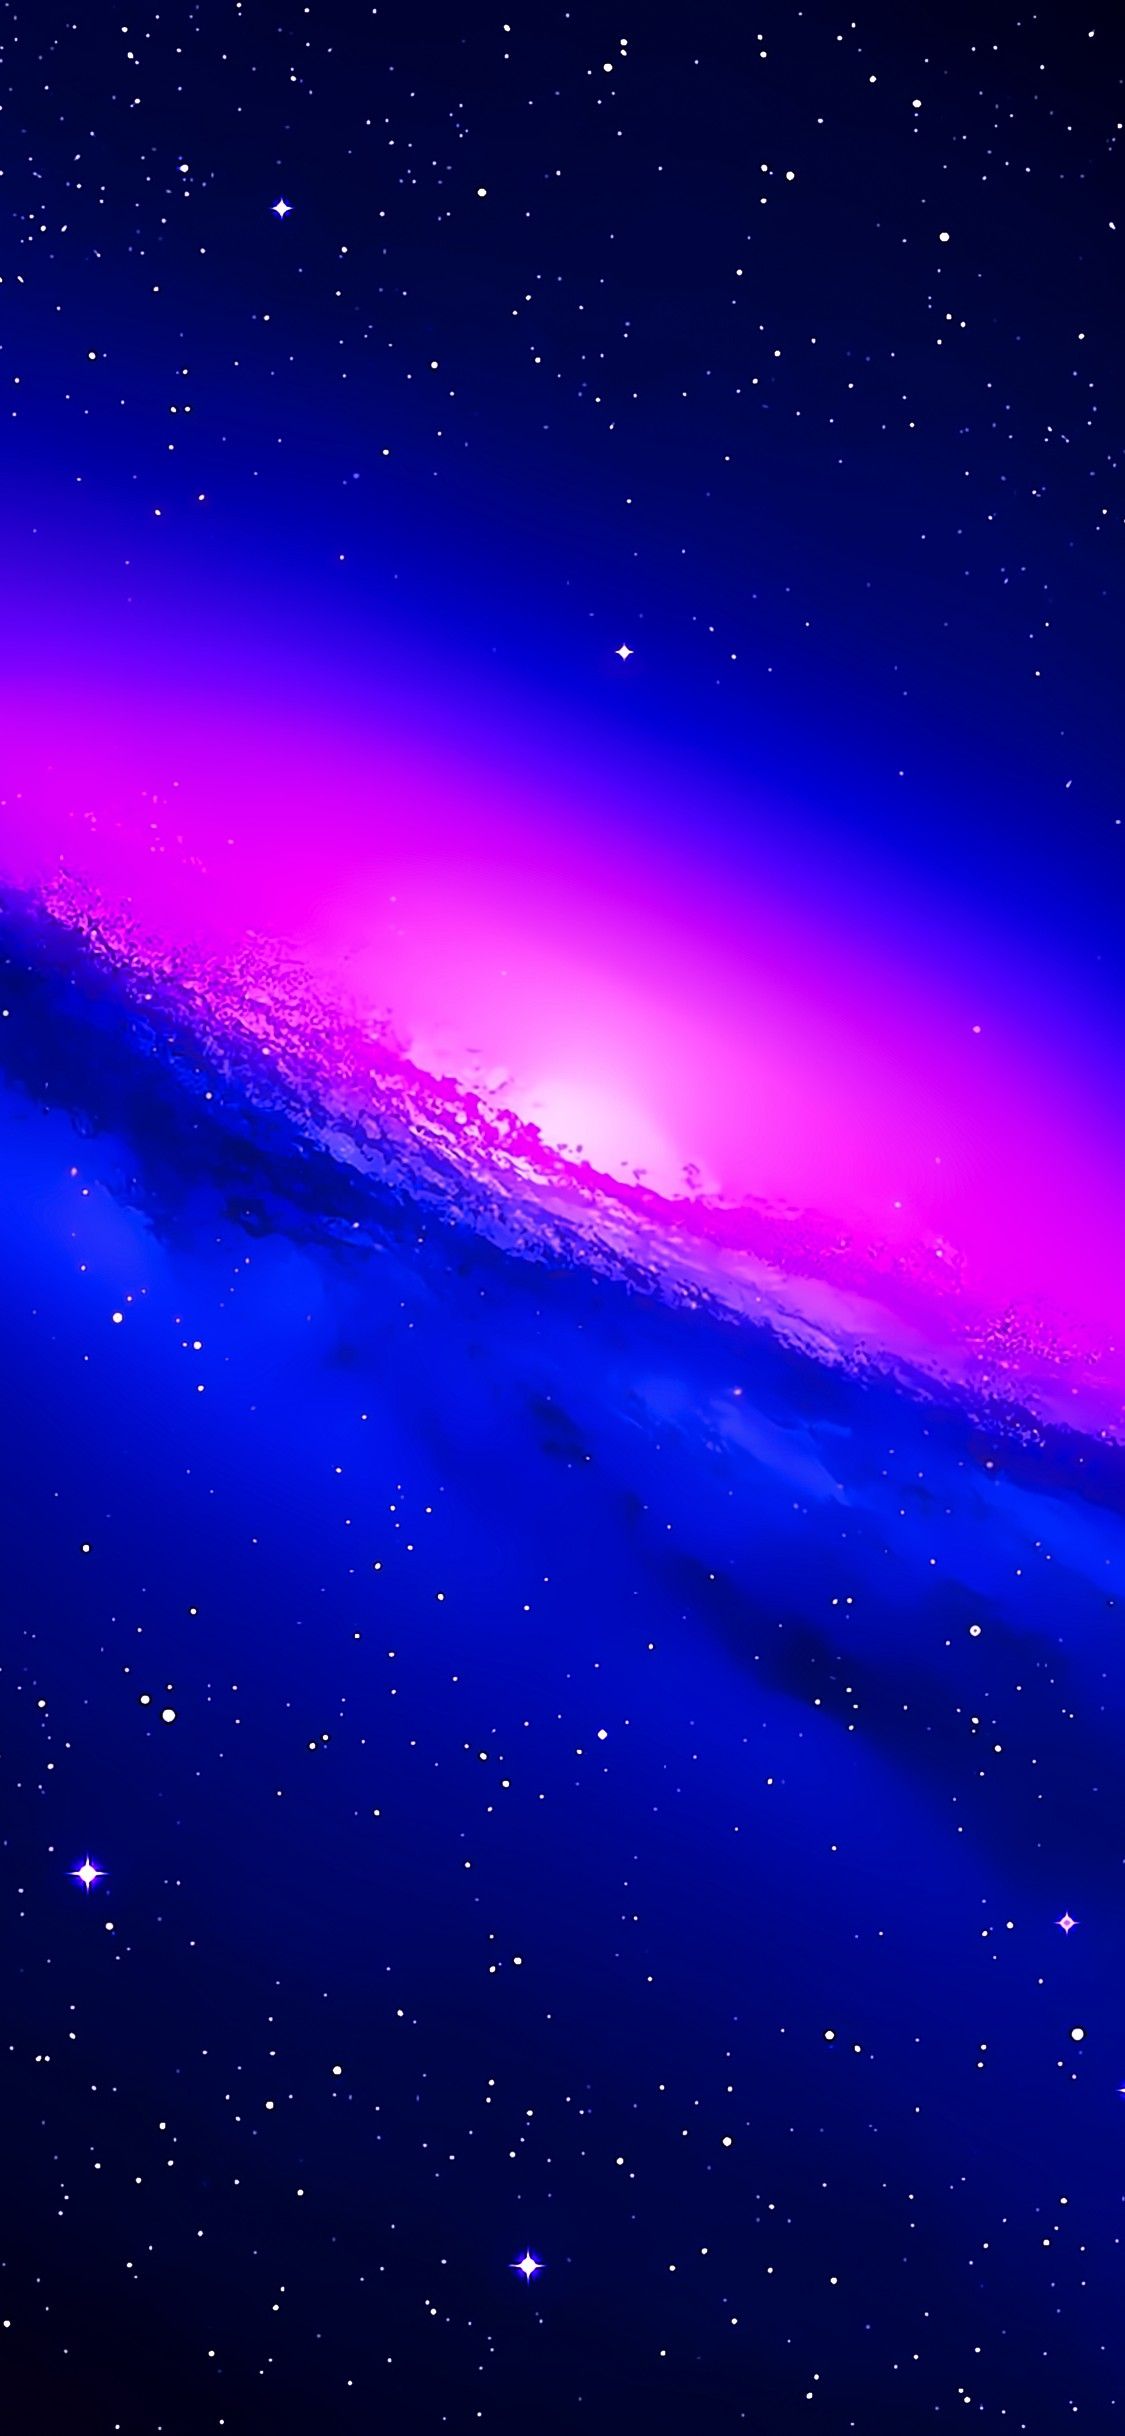 Wallpaper Background Texture Patterns Of Galaxy In Blue Color For